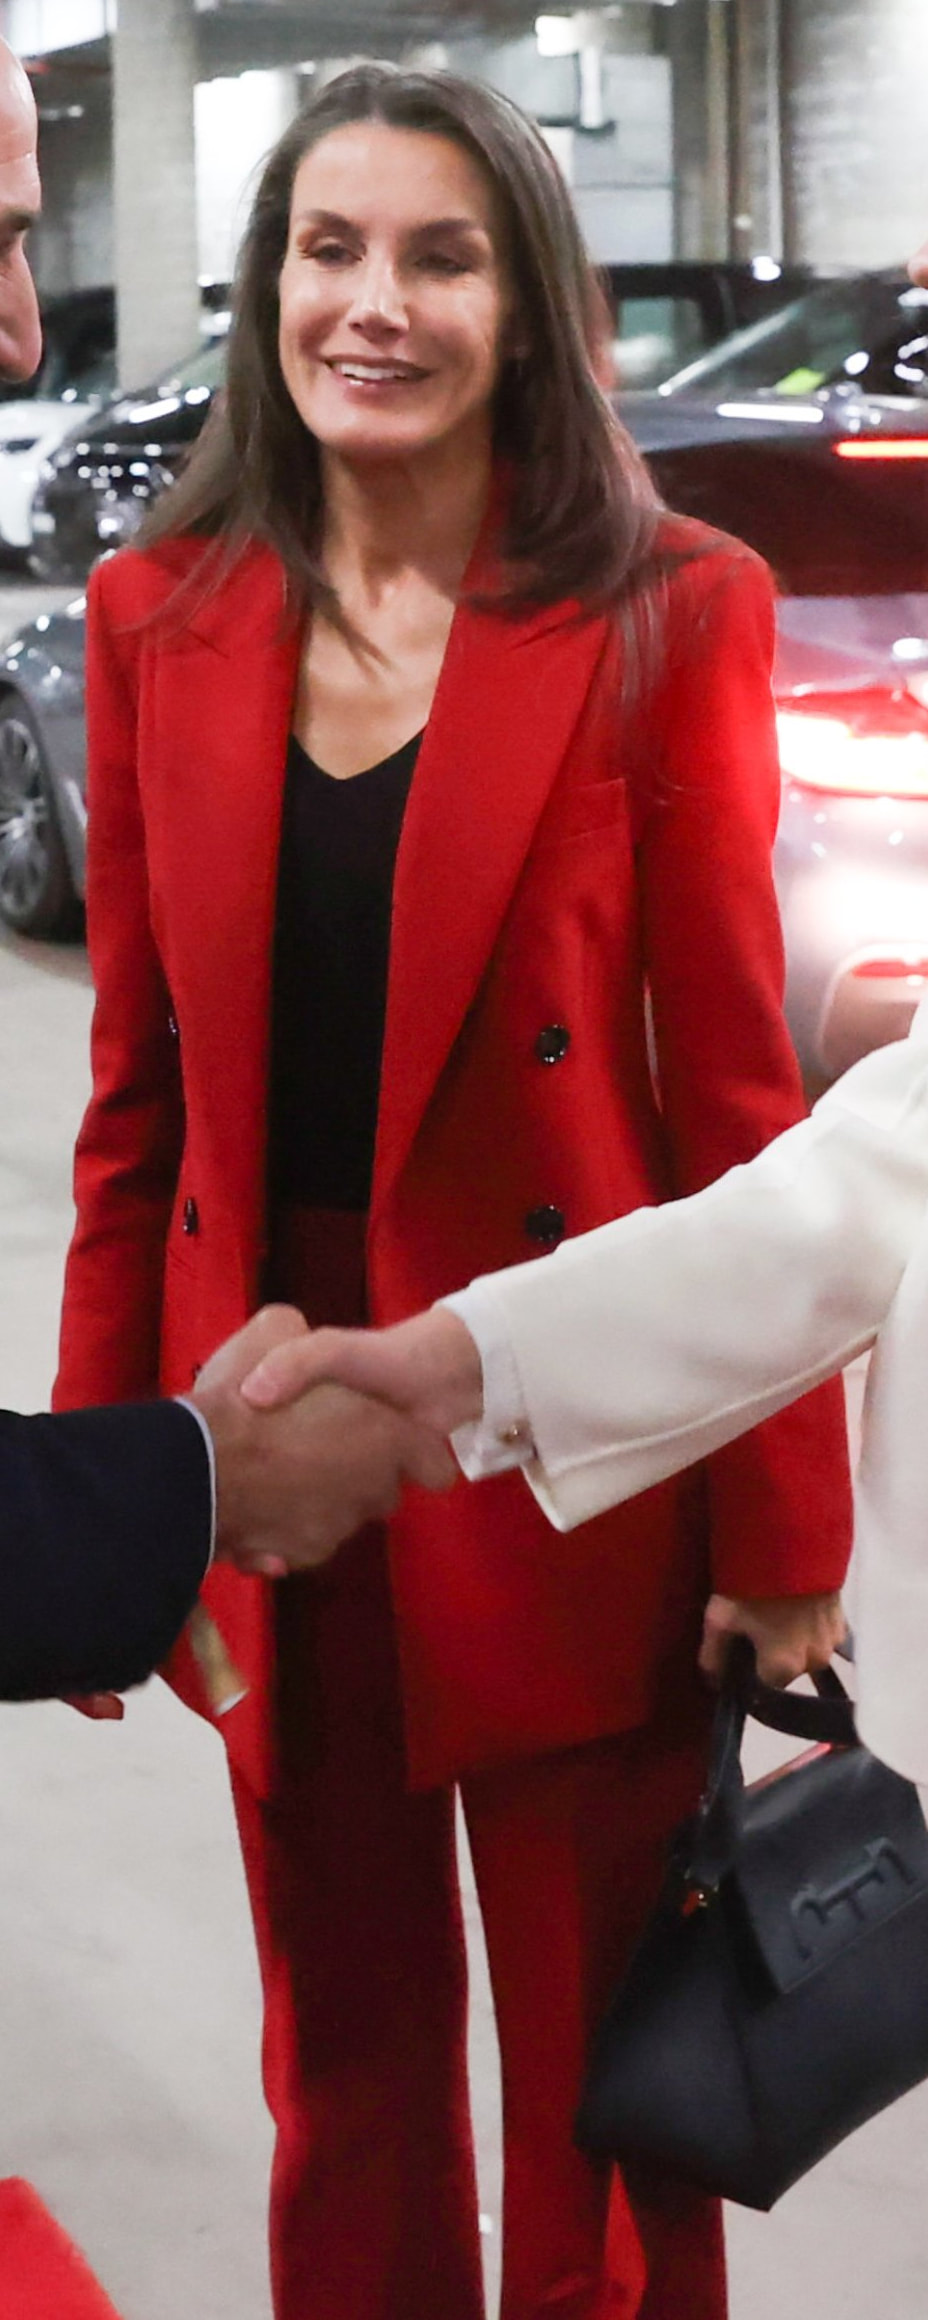 Hugo Boss Bootcut Suit Trousers in Red​ as seen on Queen Letizia.